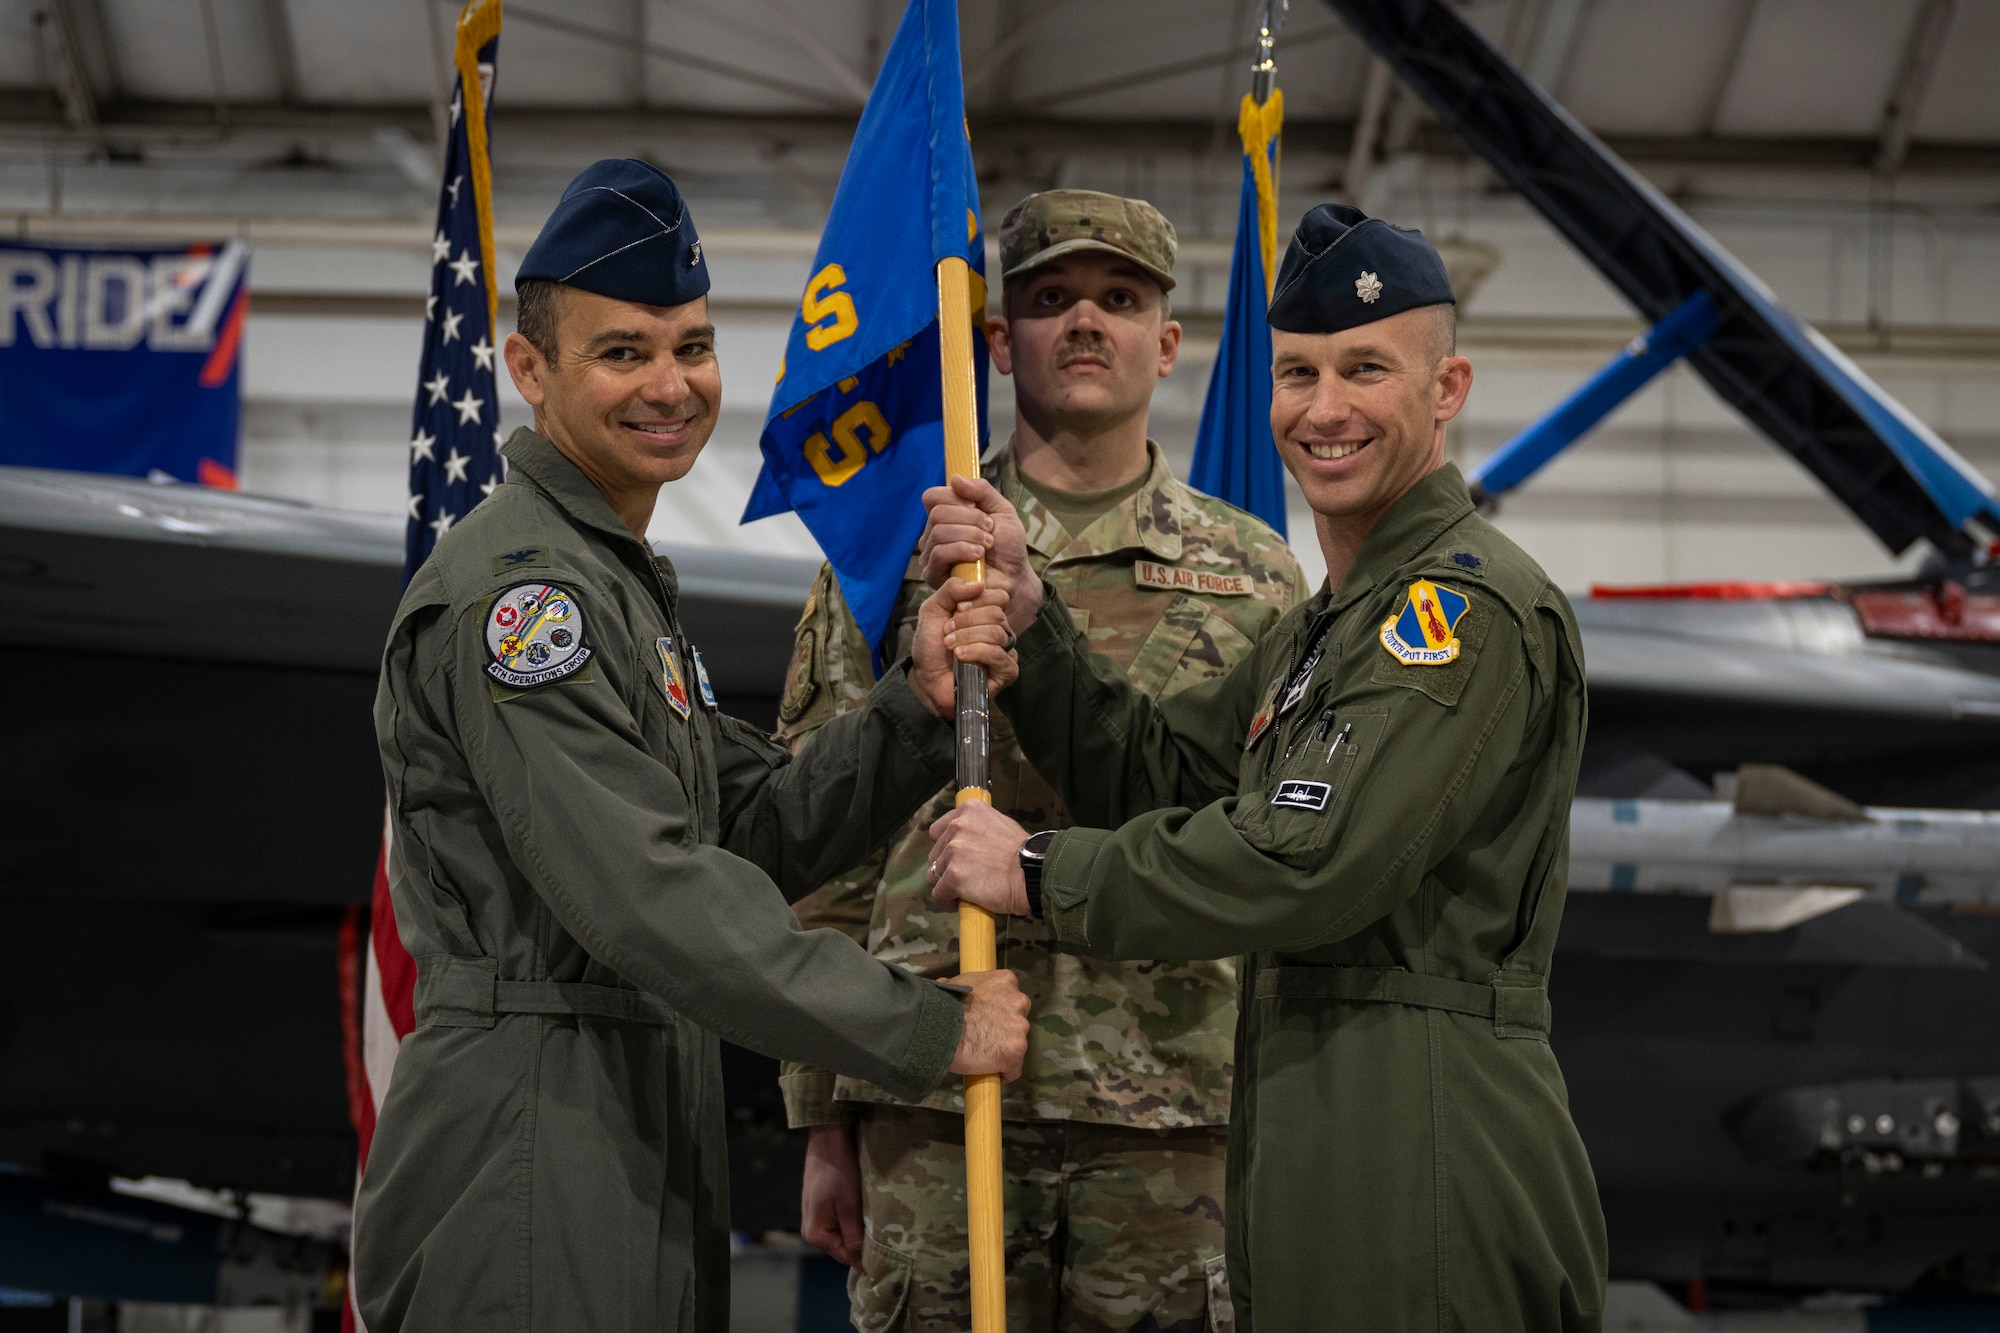 Col. Michael Alfaro, left, 4th Operations Group commander, passes the 4th Training Squadron gudion to Lt. Col. Tanner Hein, 4th TS commander, during the 4th TS Change of Command Ceremony at Seymour Johnson Air Force Base, North Carolina, March 17, 2023. The passing of the guidon to a new commander symbolizes the acceptance of command.